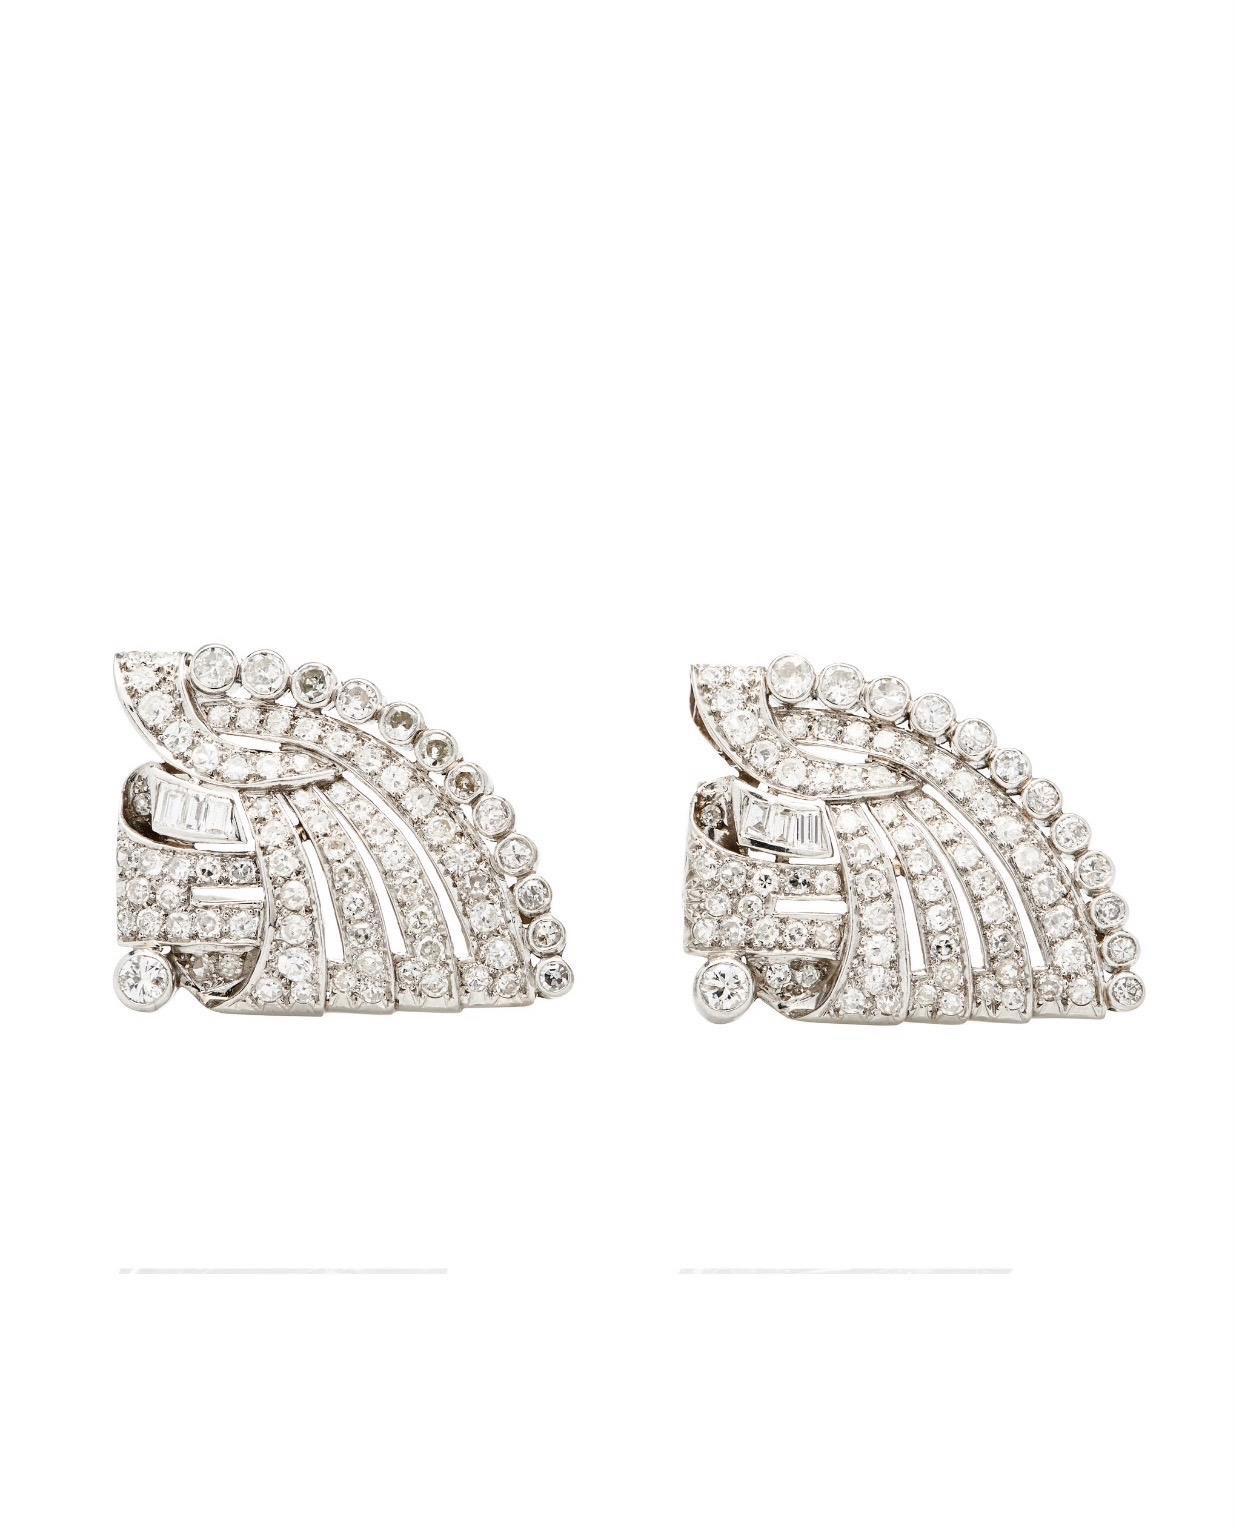 A showstopper bracelet! Original Art Deco dress clips can now be worn as a stunning one - of - a- kind Hefty Cuff Bracelet.
The original clips have approx 7.25+ carat diamonds set in platinum. They detach from a sold 18k custom cuff. Style it your